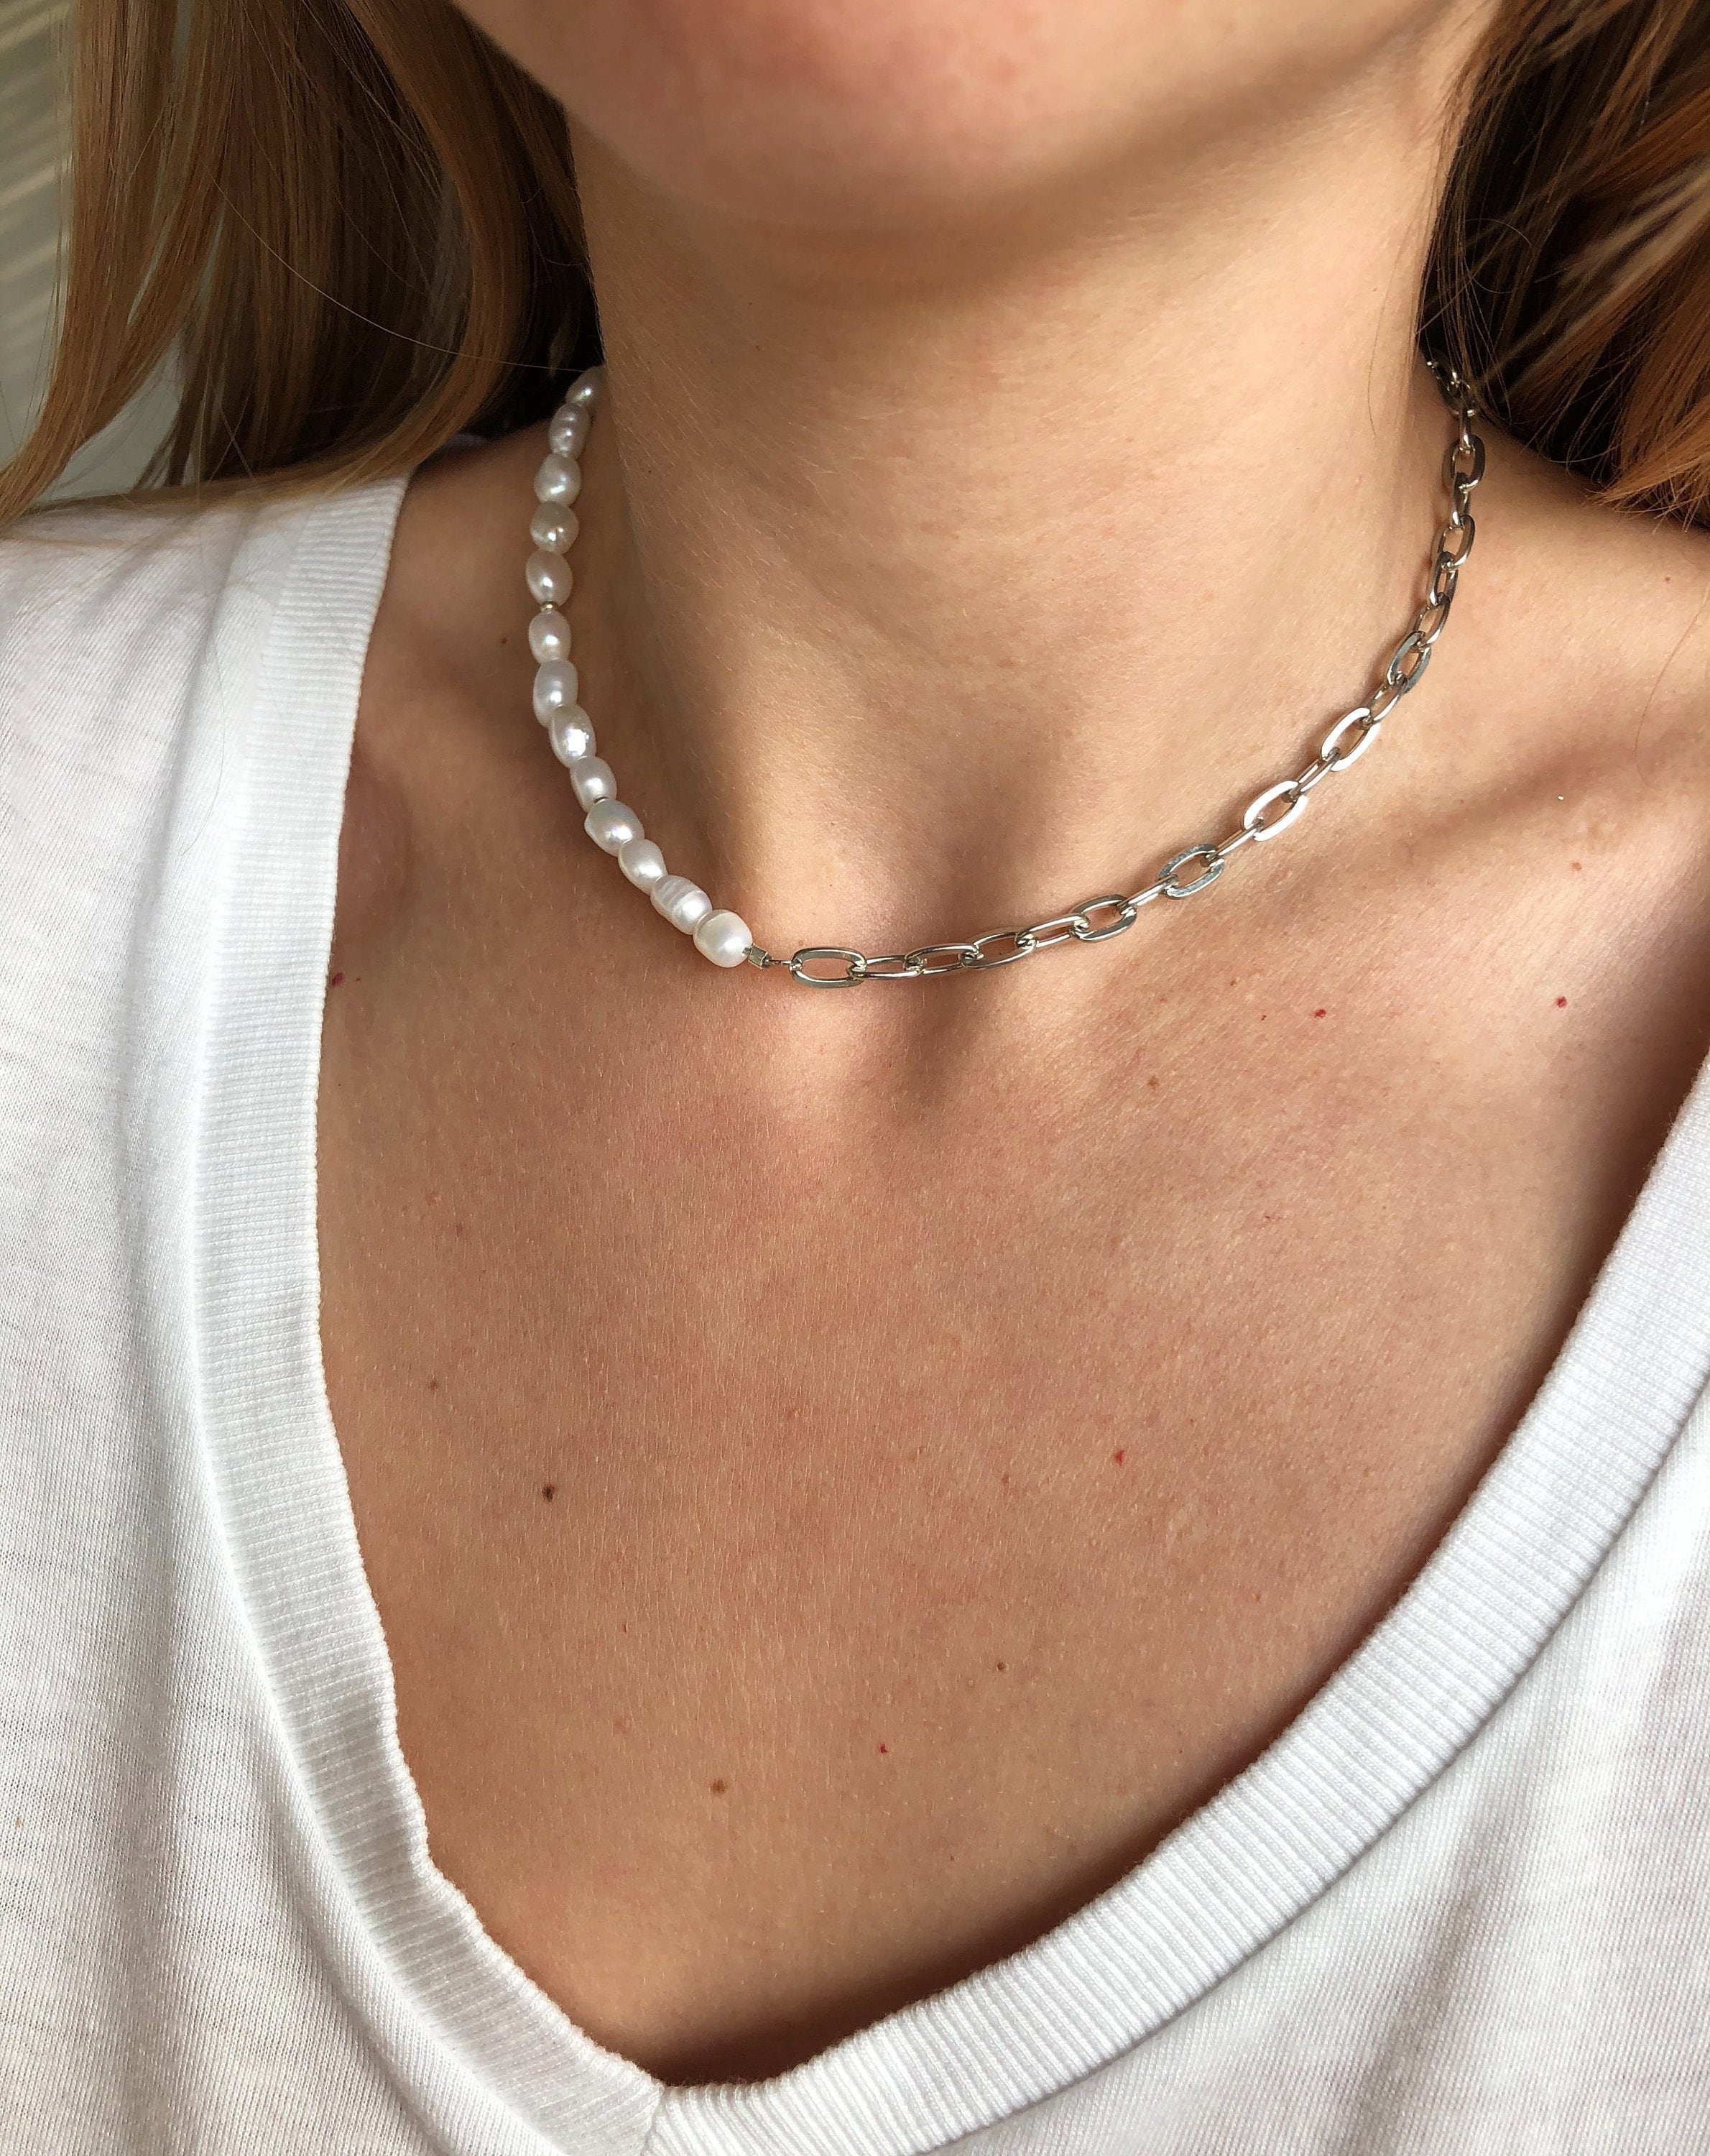 Pearl Chain Necklace, Half Pearl and Chain Necklace, Pearl Choker Chain,  Layering Necklace, Minimalist Necklace, Silver Chain and Pearls - Etsy | Pearl  chain necklace, Choker necklace, Chain necklace